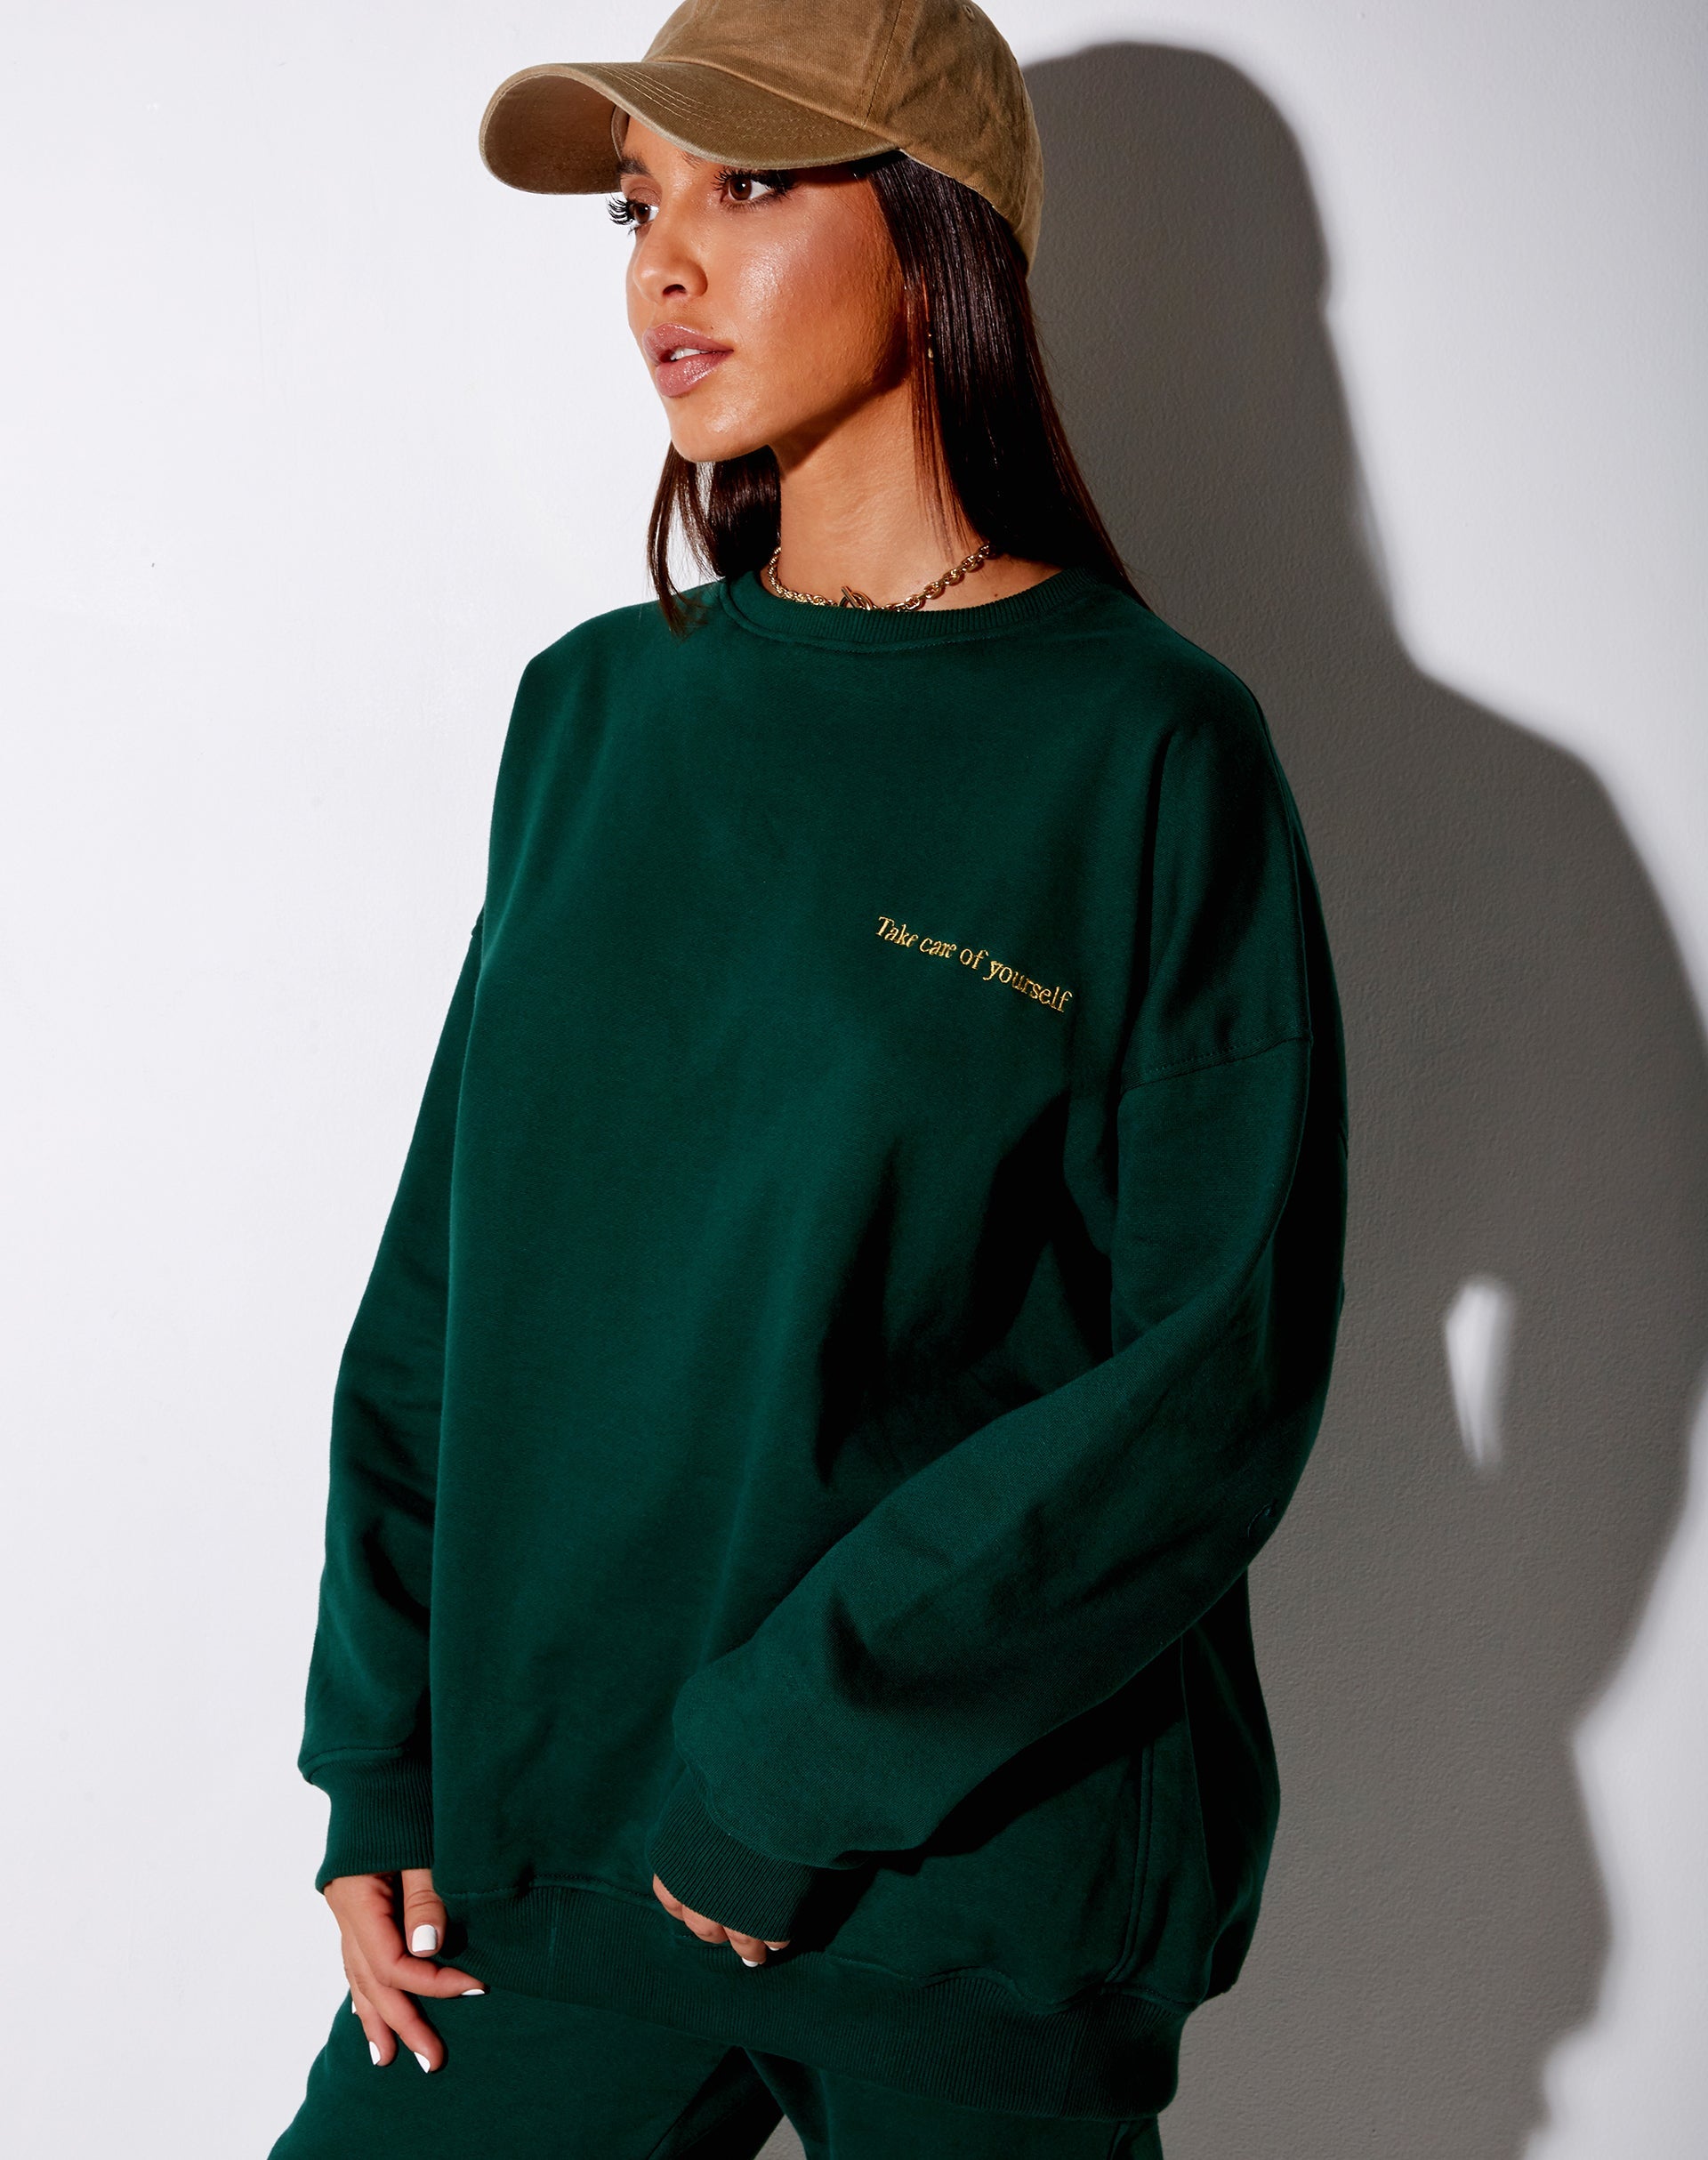 Image of Glo Sweatshirt in Bottle Green with Take Care Of Yourself Embro